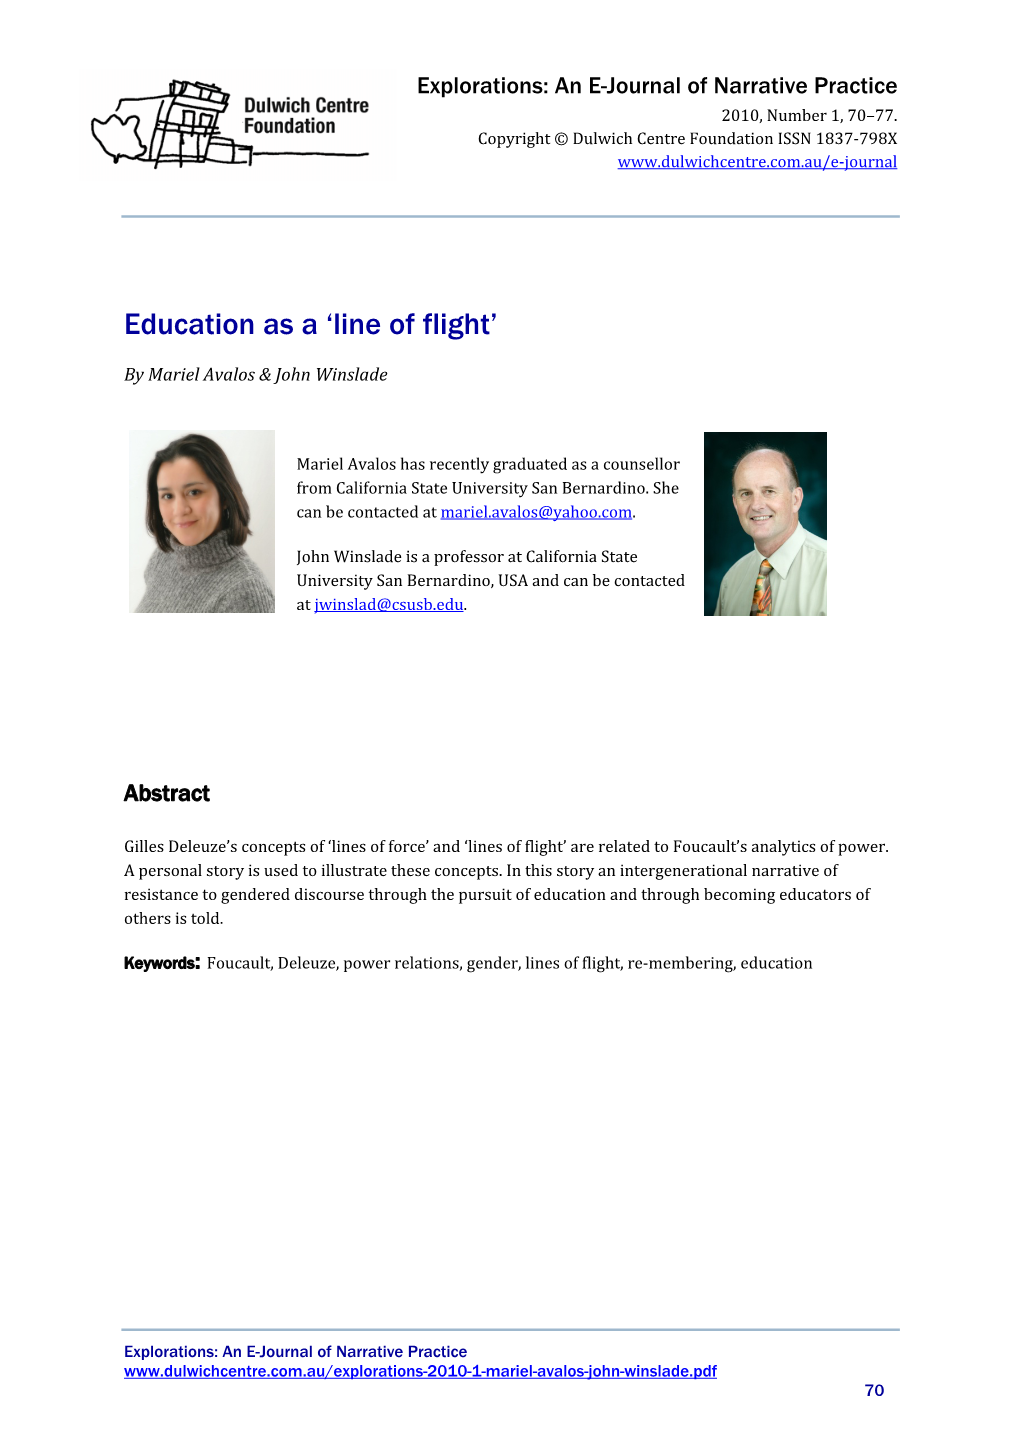 Education As a 'Line of Flight'